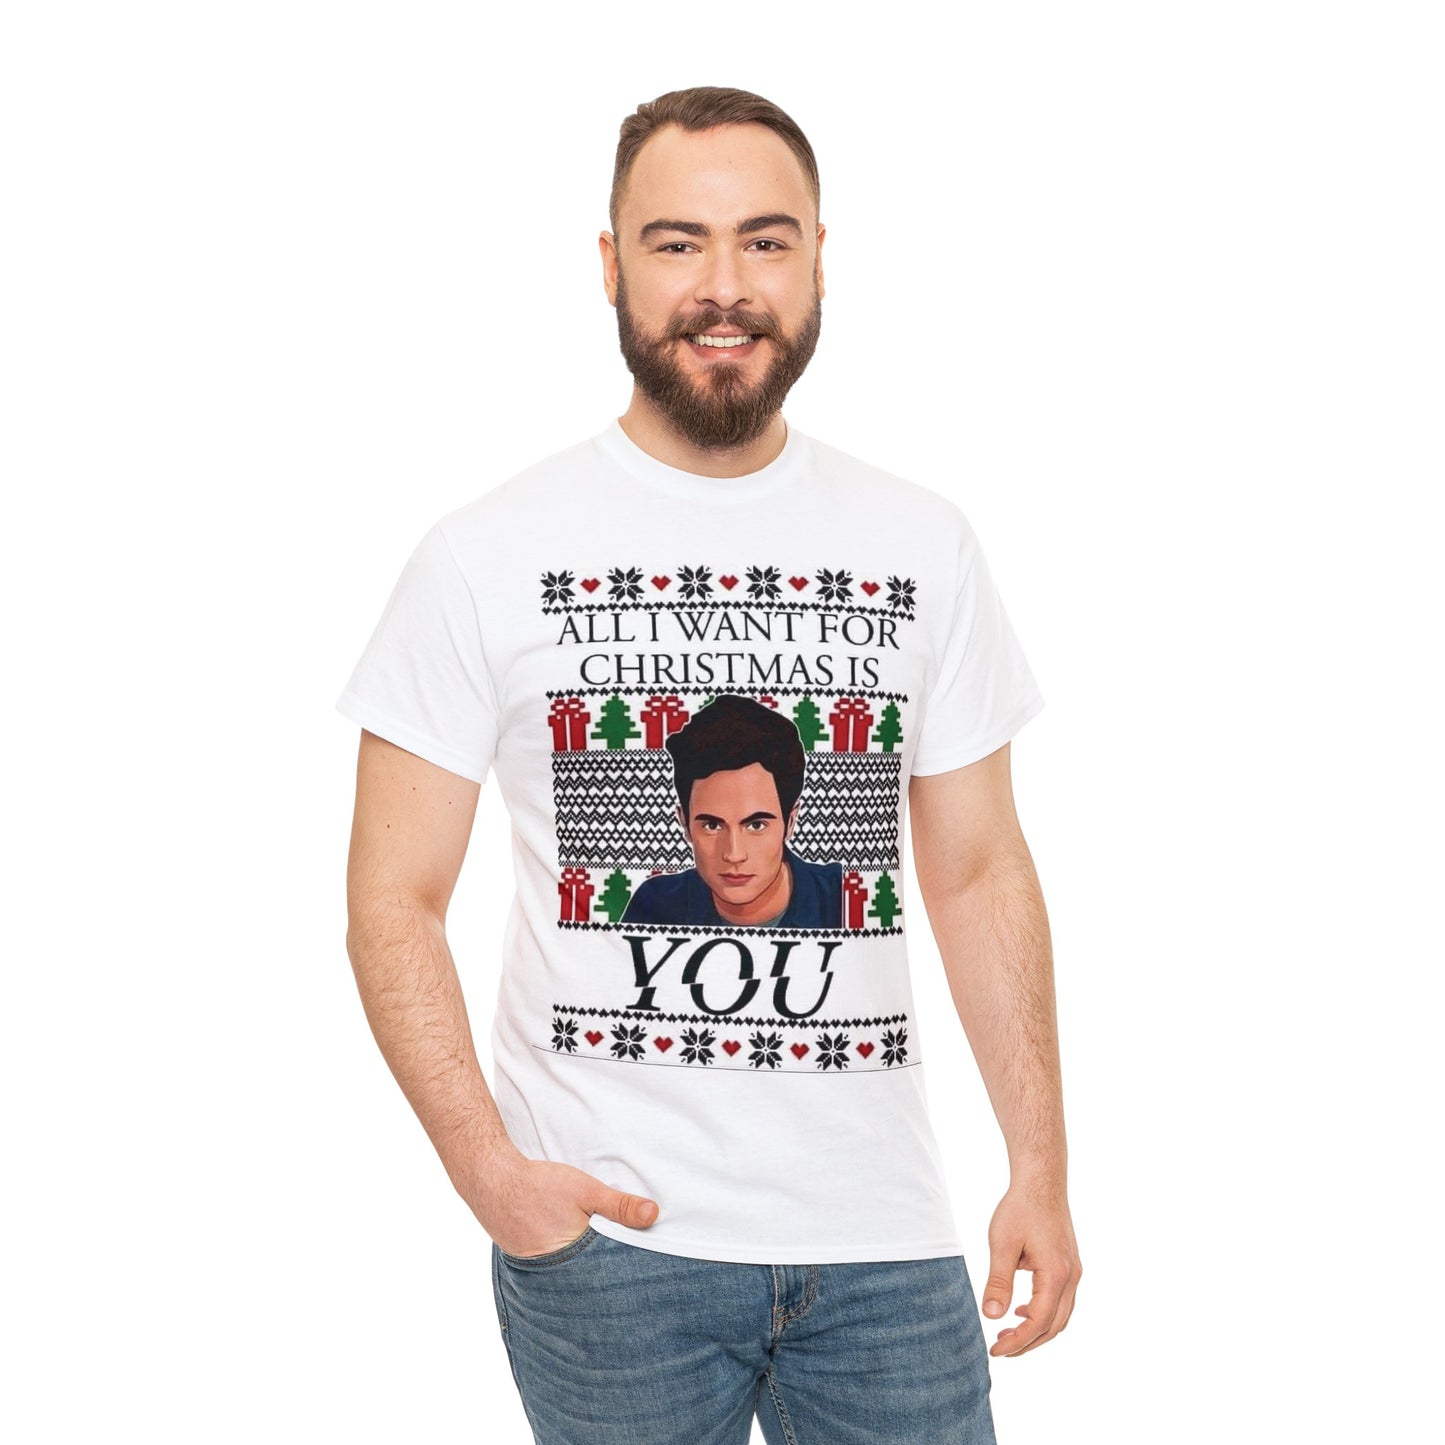 All I Want For Xmas Is You Cotton Tee